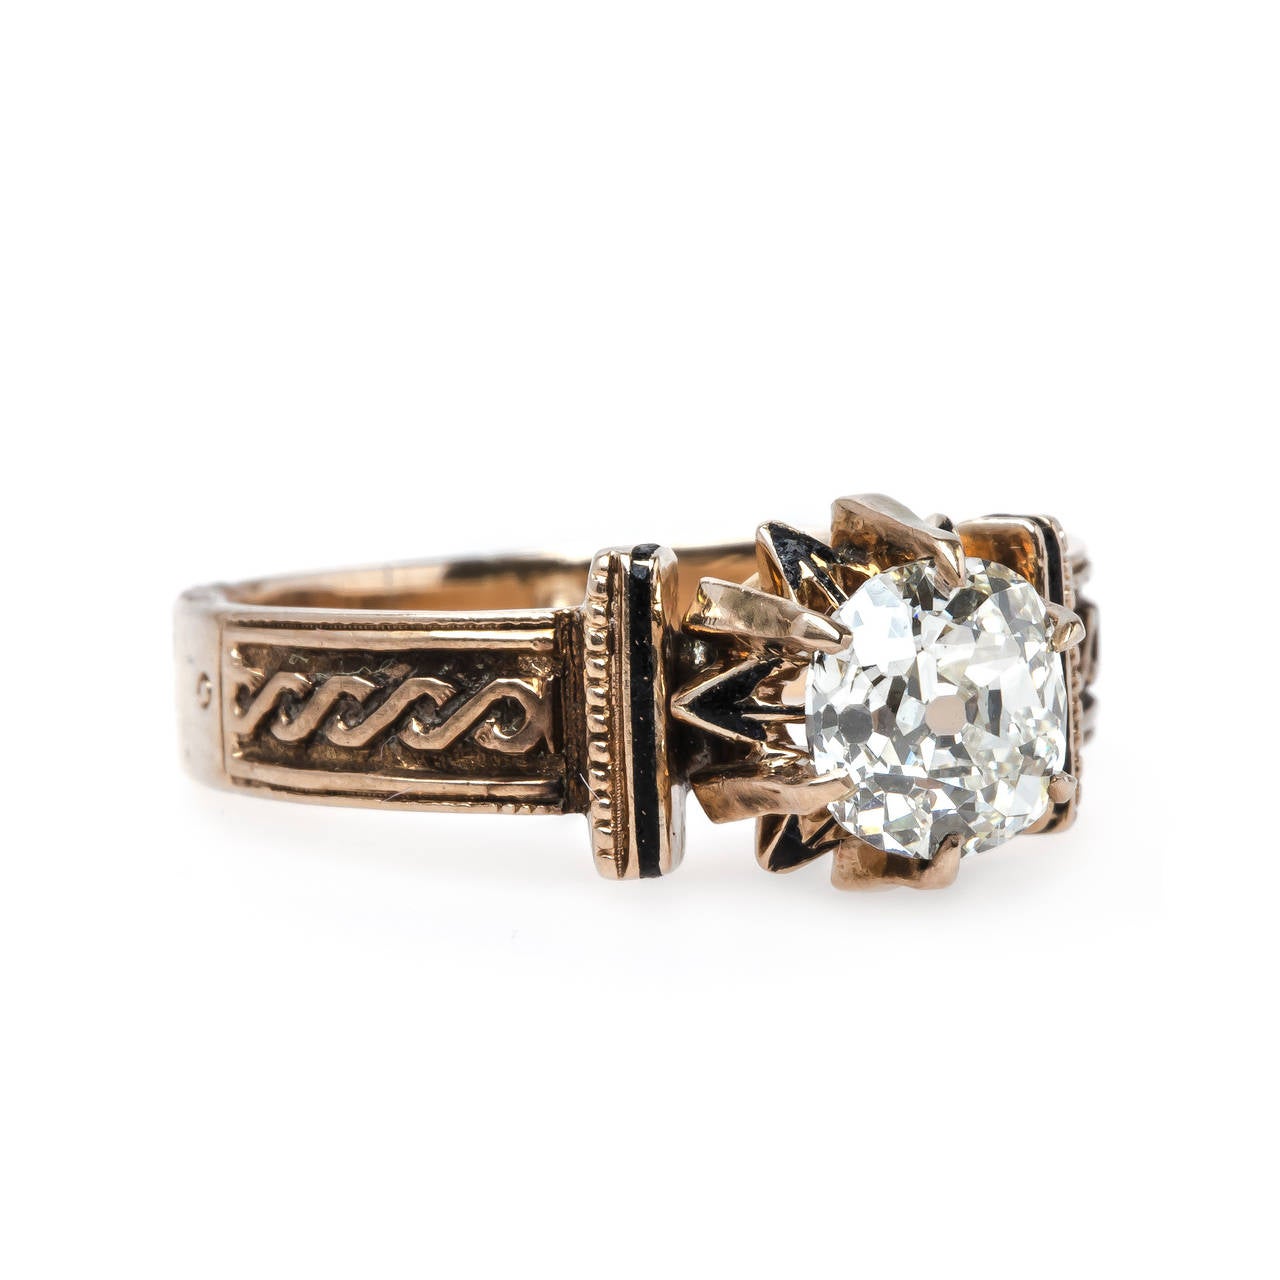 Marrakech is an intriguing authentic Early Victorian era (circa 1840) 14k rose gold ring centering a six-prong set 0.91ct EGL certified Old Mine Cut diamond graded K color and SI1 clarity. The stunning and unique antique ring is further decorated